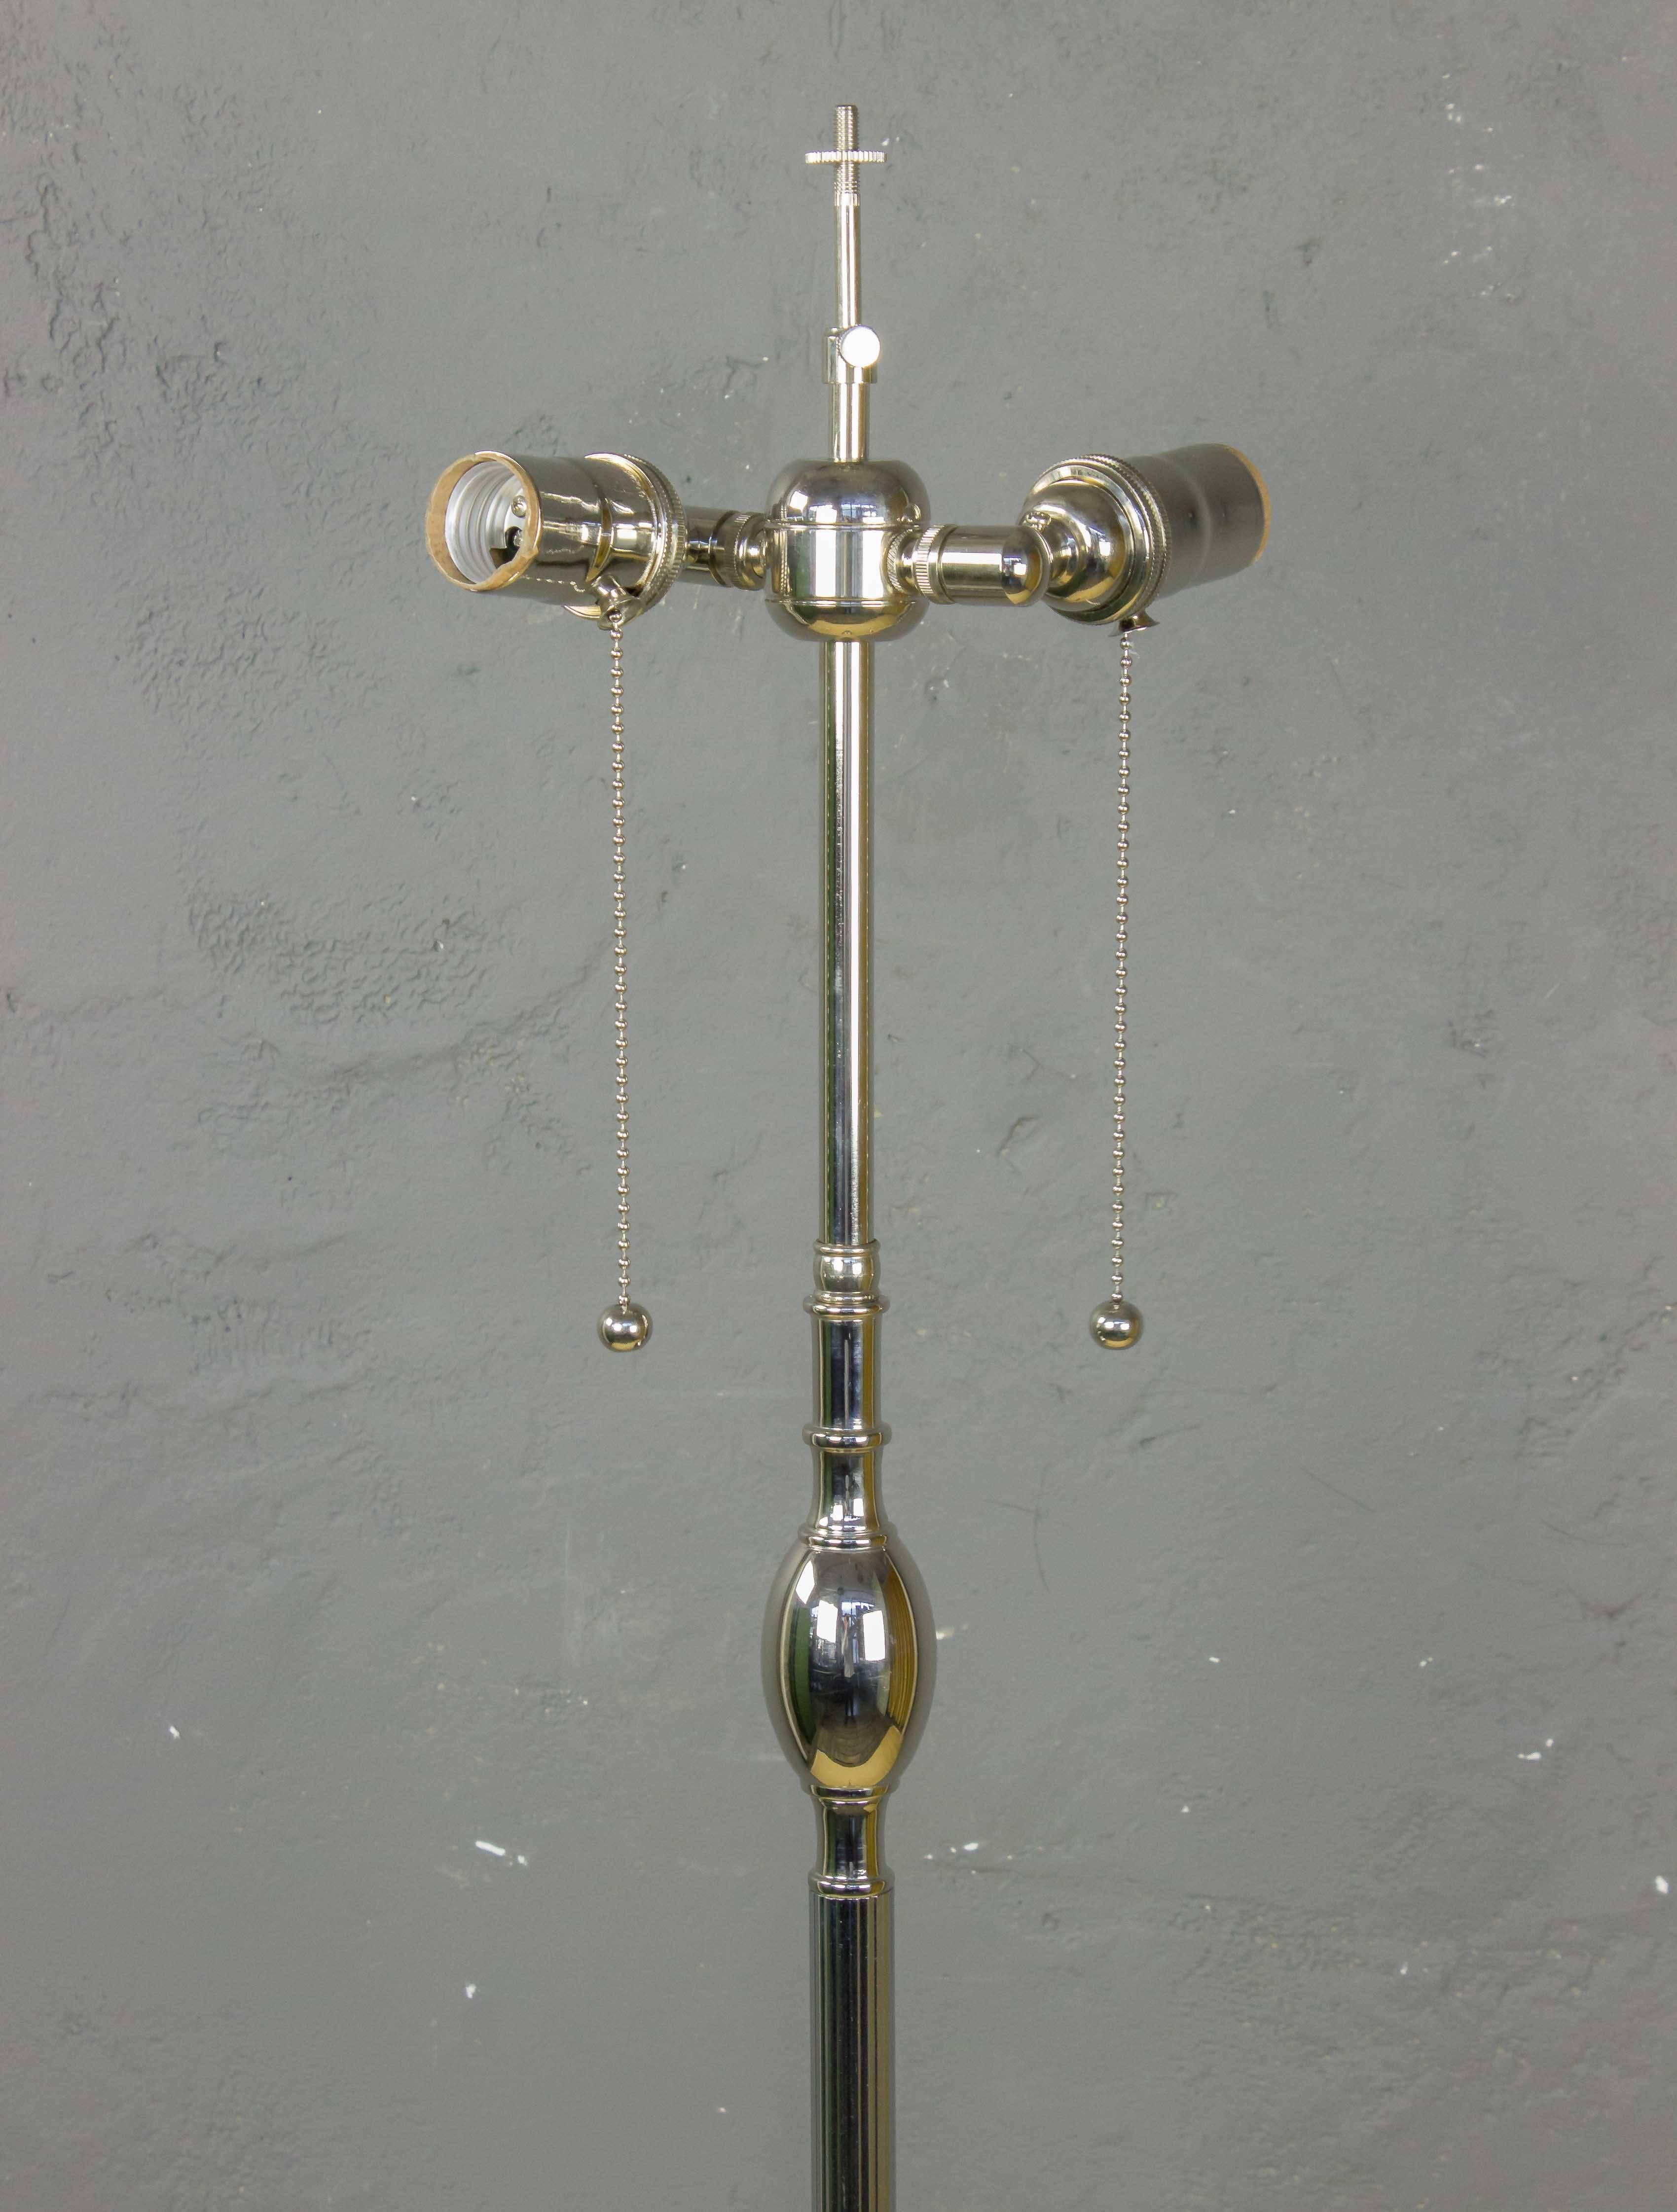 1940s French Nickel-Plated Floor Lamp with a Tripod Base 3